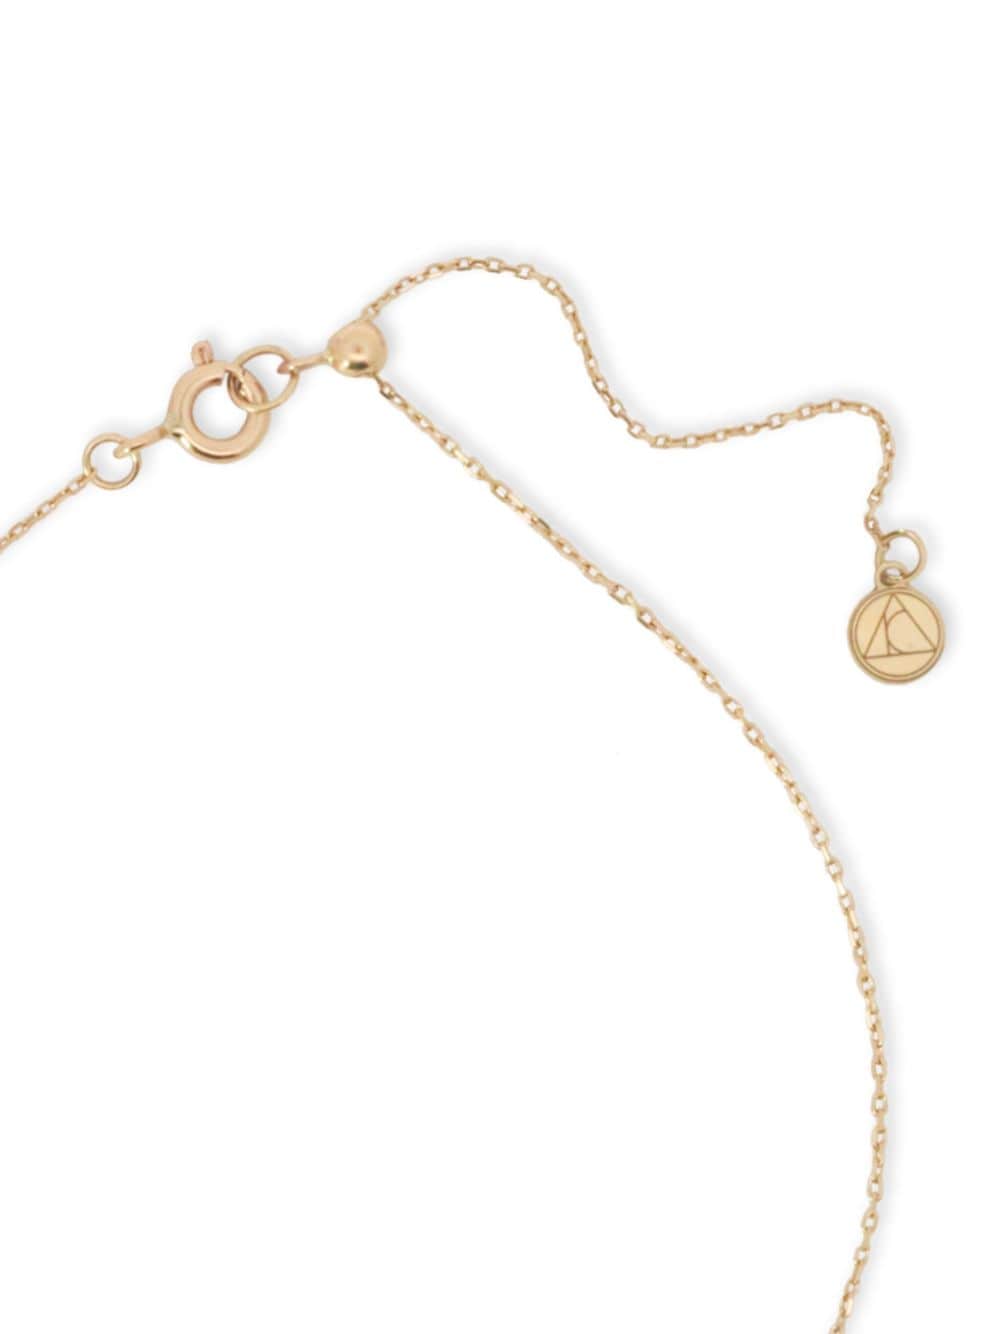 Shop The Alkemistry 18kt Yellow Gold Nude Shimmer Chain Anklet